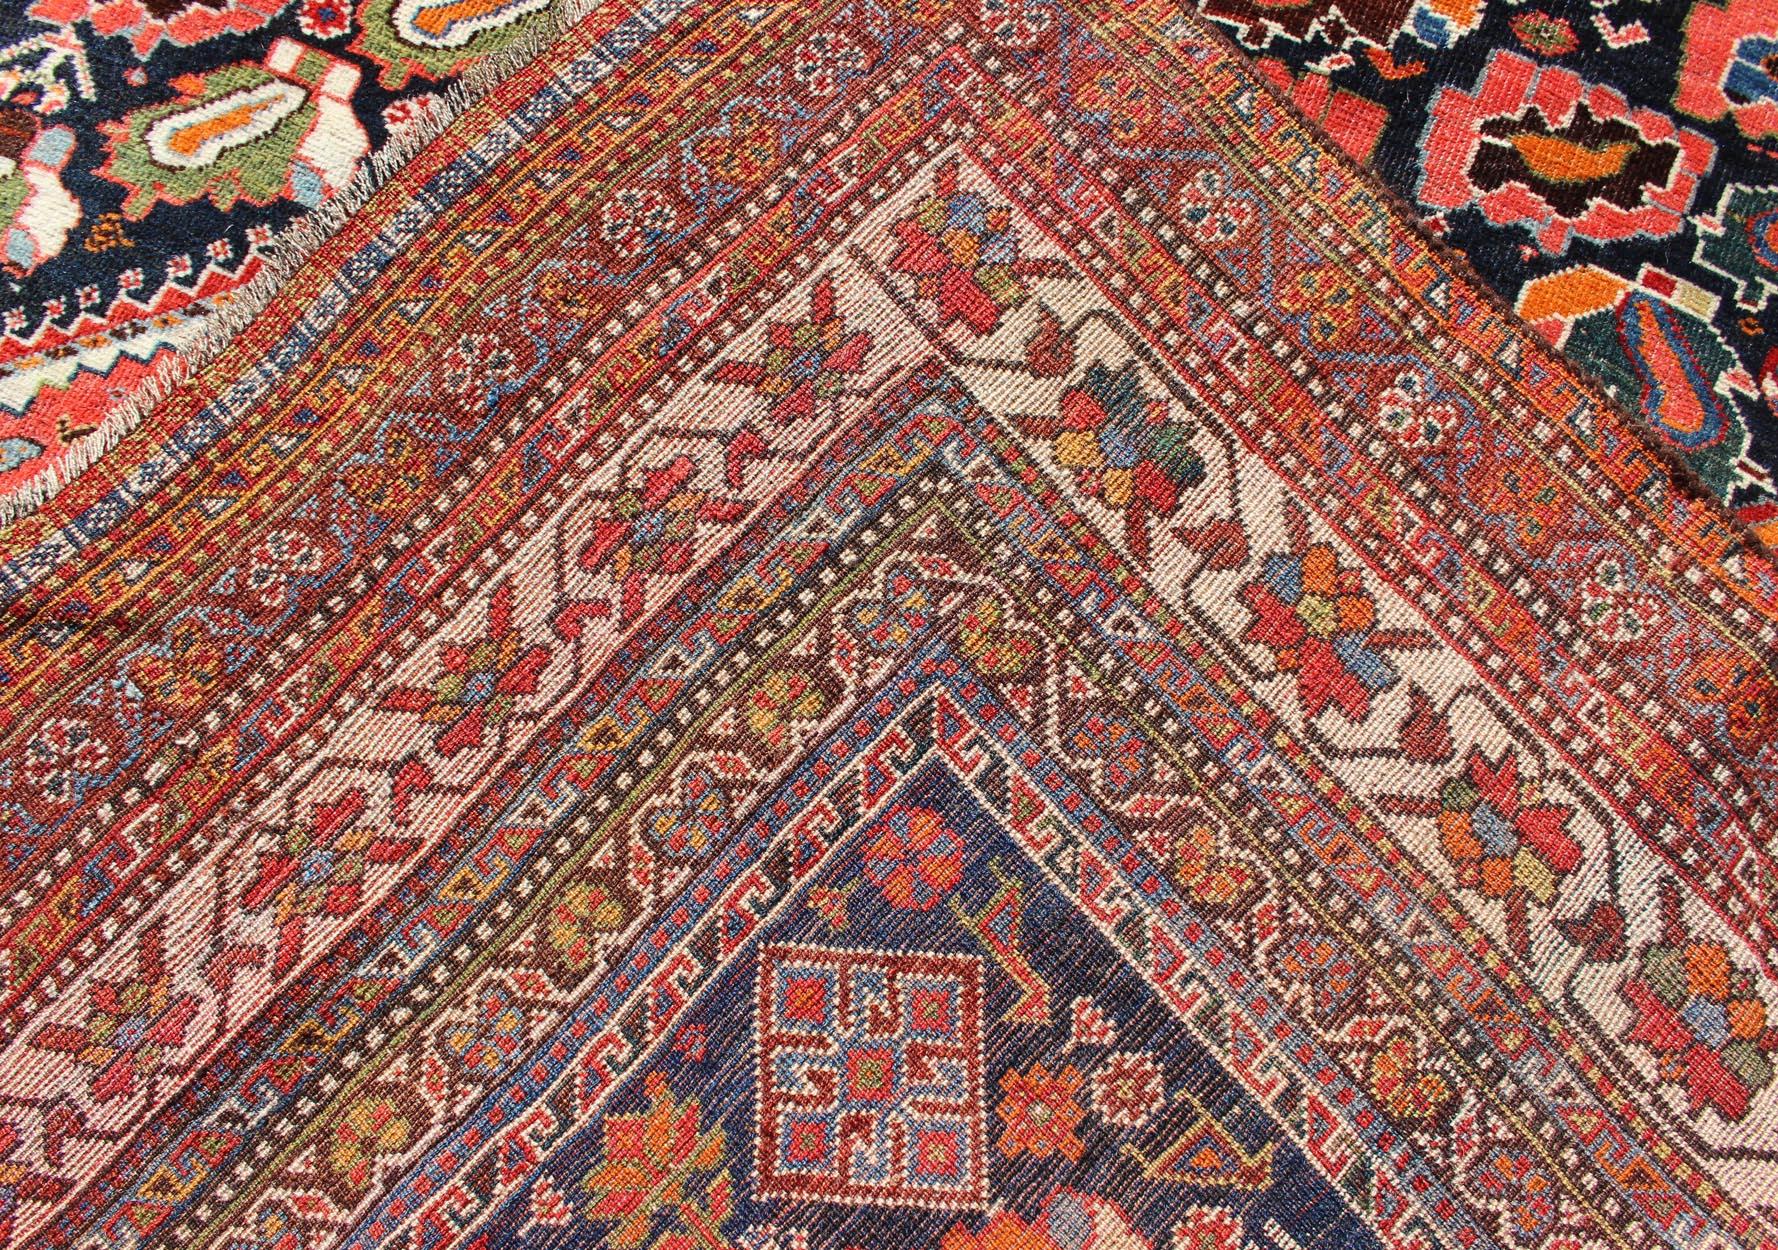 Colorful Tri-Medallion Antique Persian Qashqai Rug with Detailed Tribal Design For Sale 3